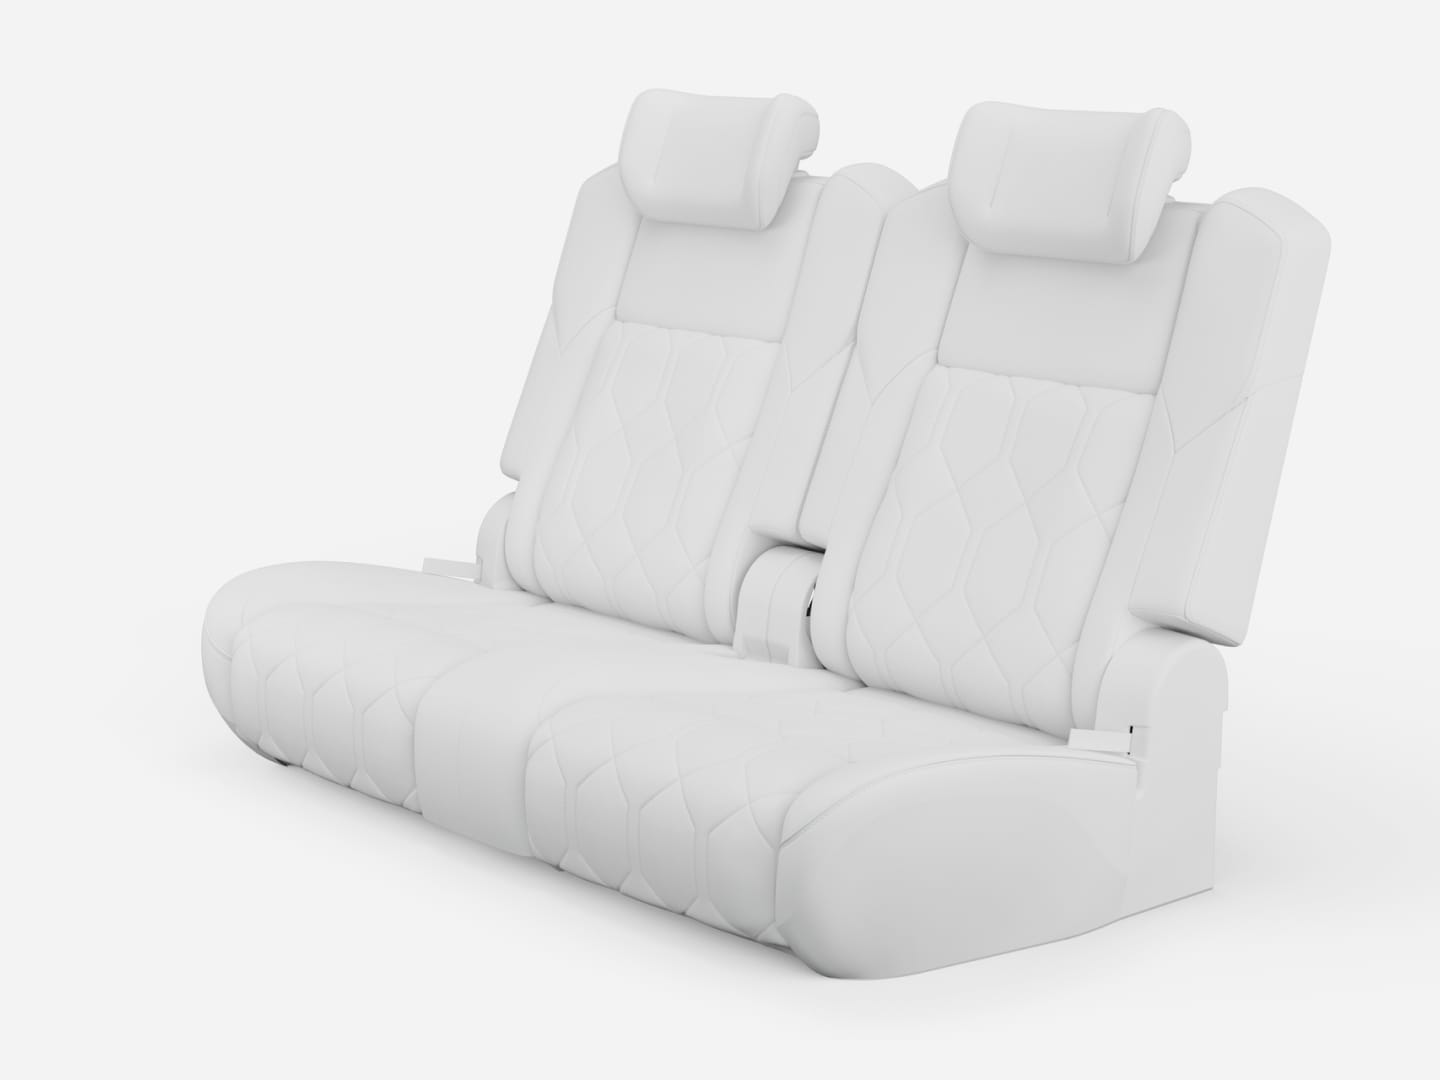 Image of the advanced comfort features and power-operated adjustments available in the Volvo EM90 driver’s seat.